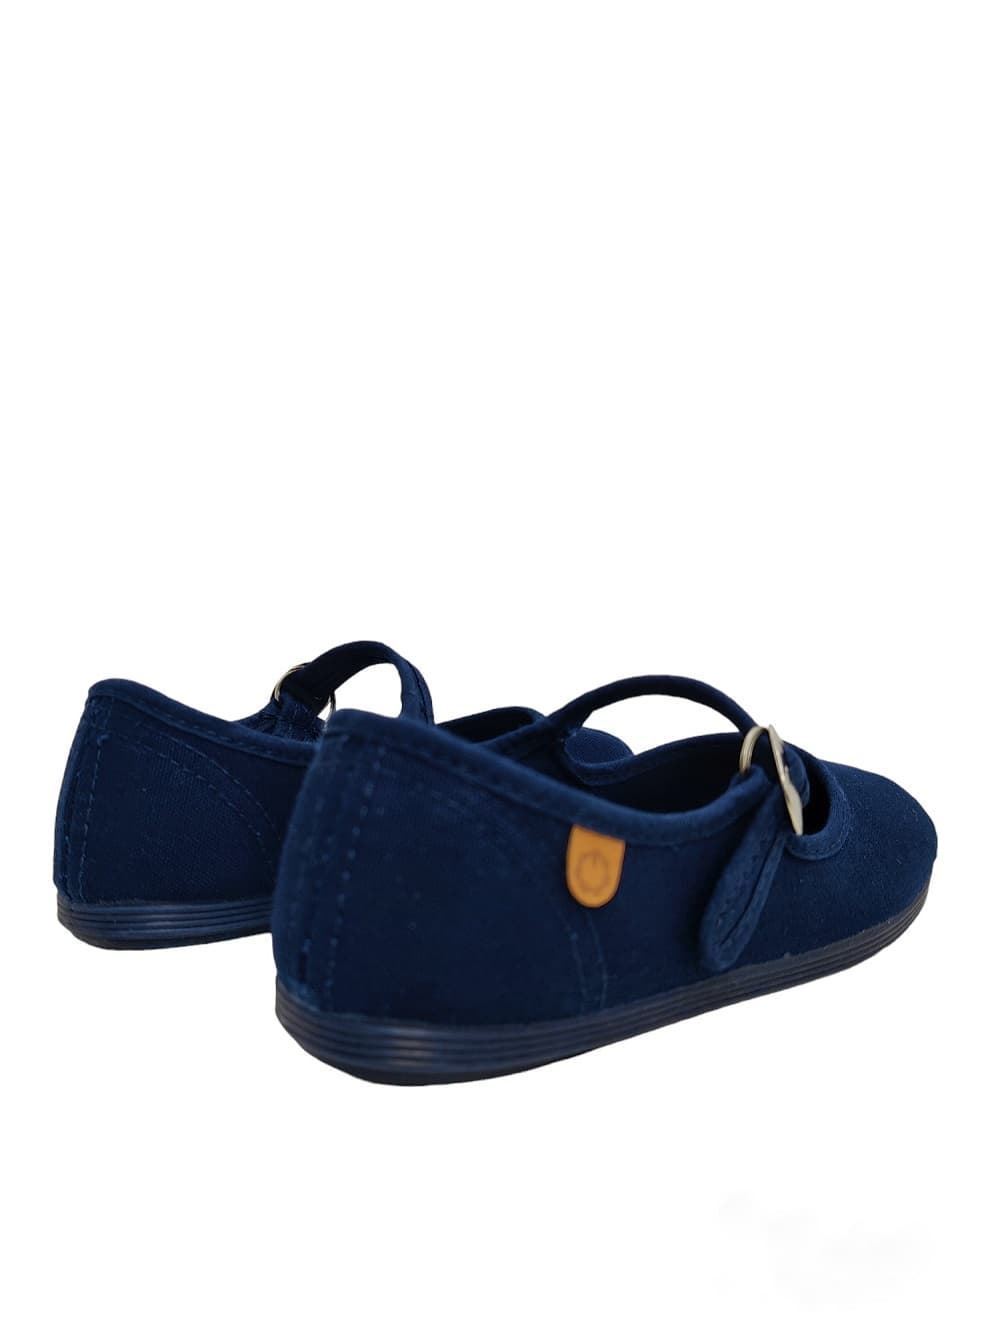 The Merceditas Chain for girls Navy Blue Canvas - Image 3